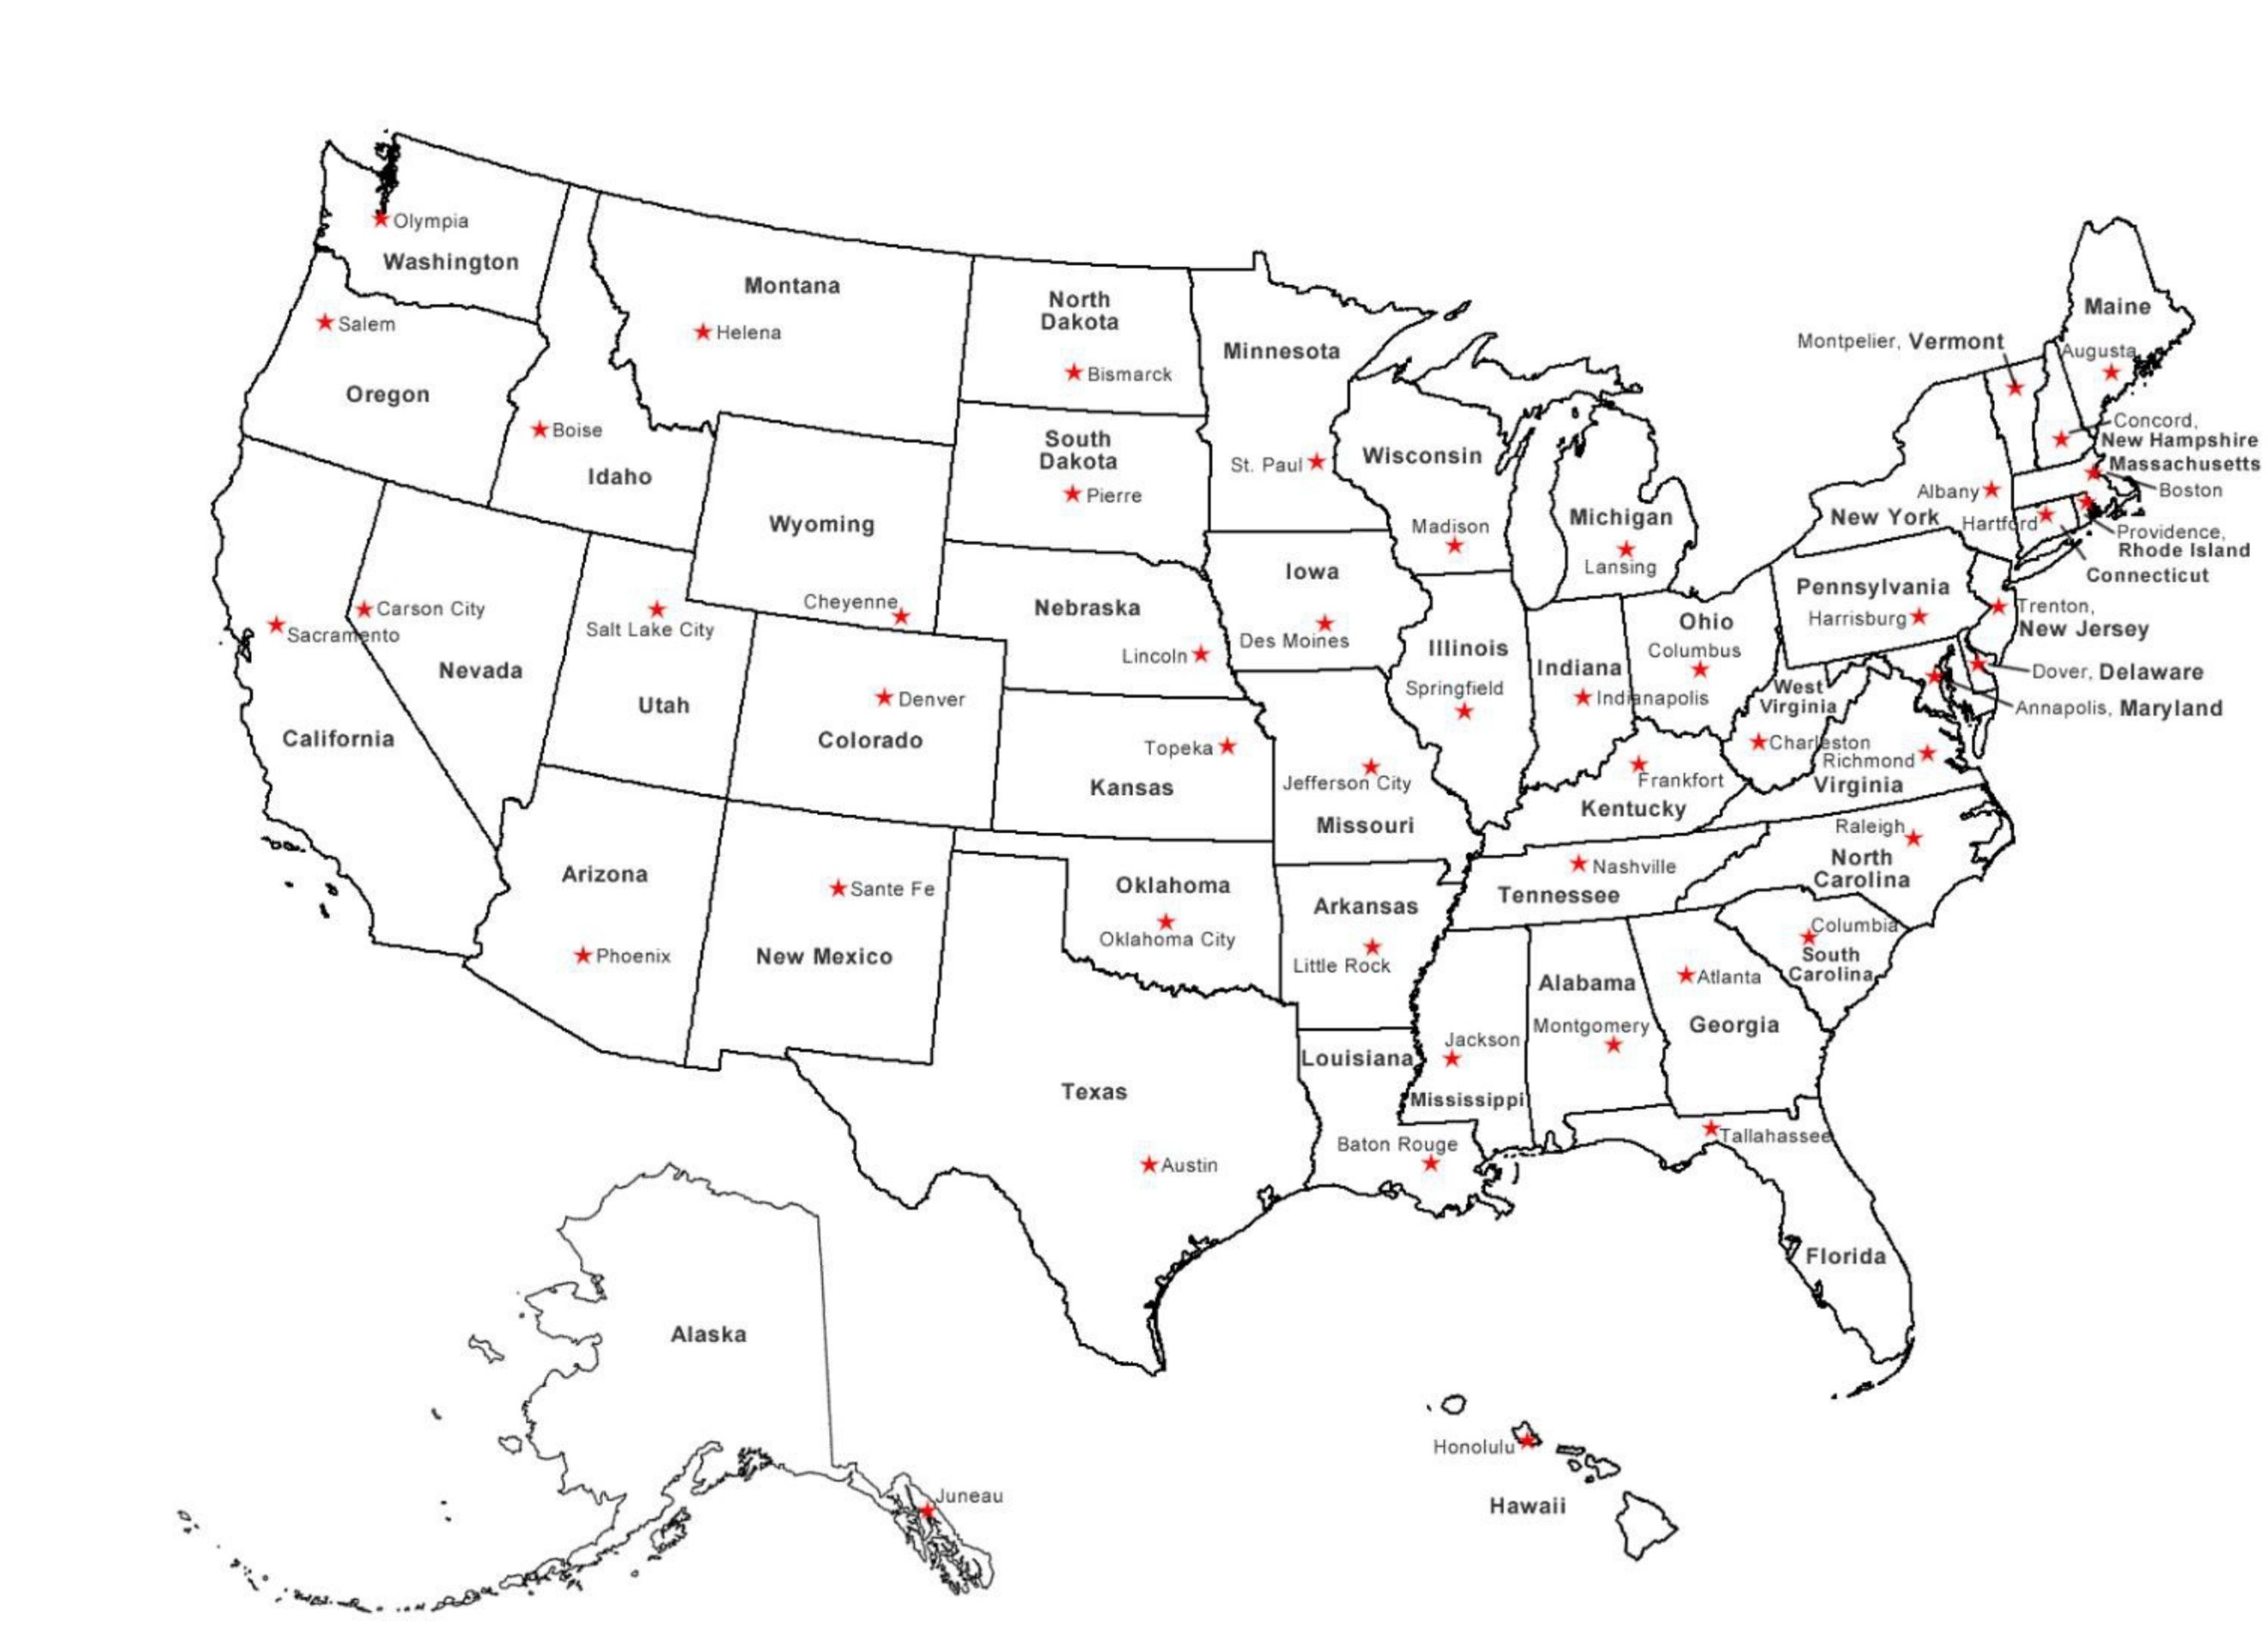 10 Inspirational Printable Map Of the United States Of America with Names